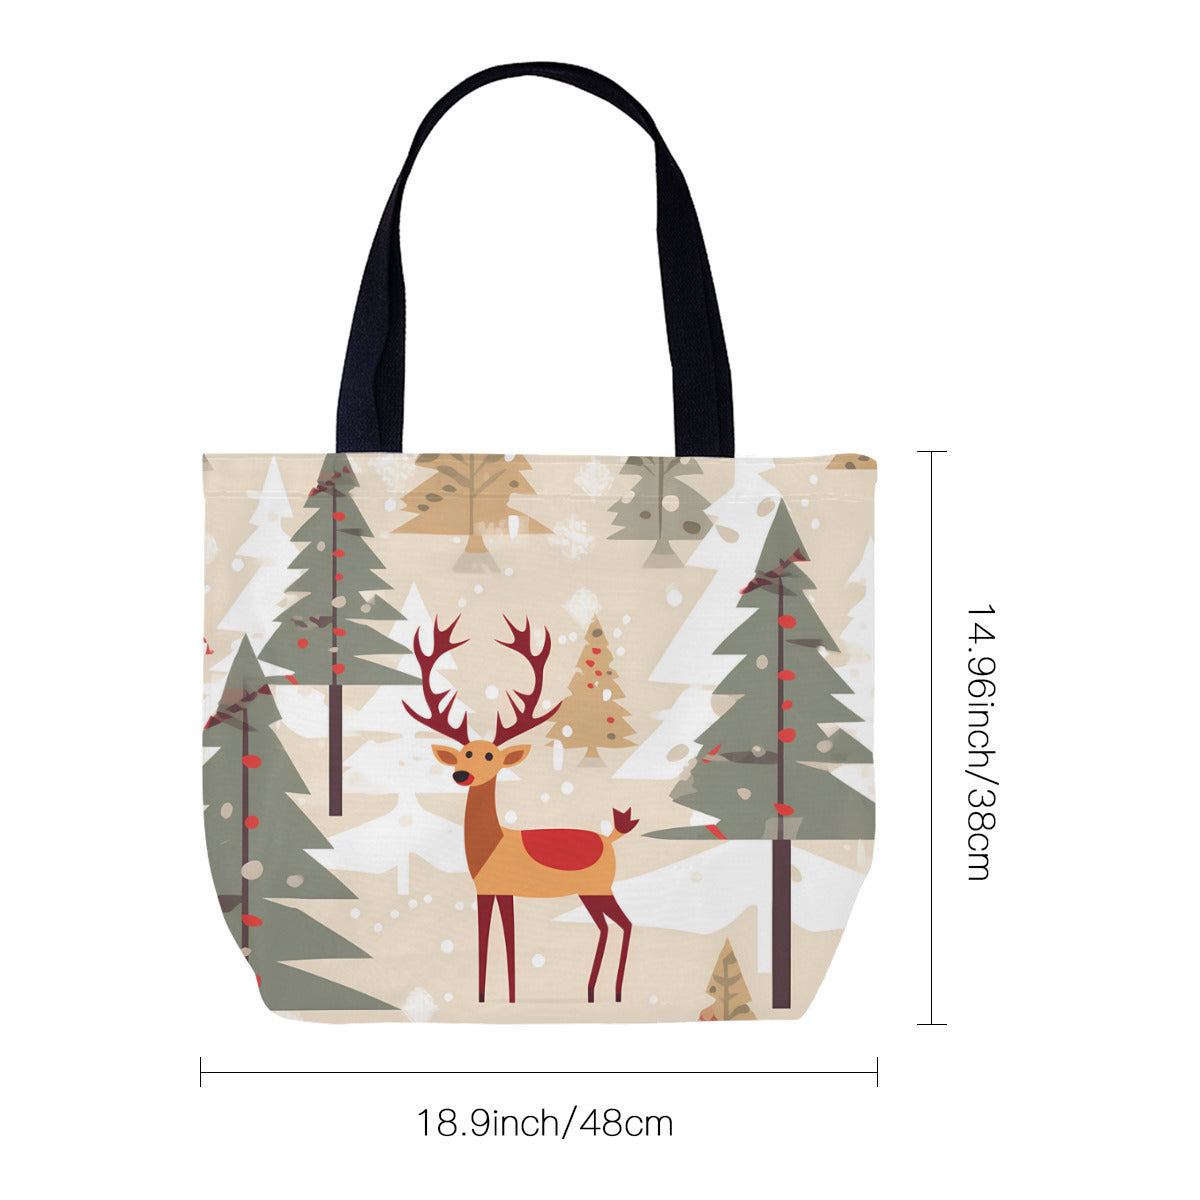 This tote bag is 18.9 inch long and 14.96 inch high.